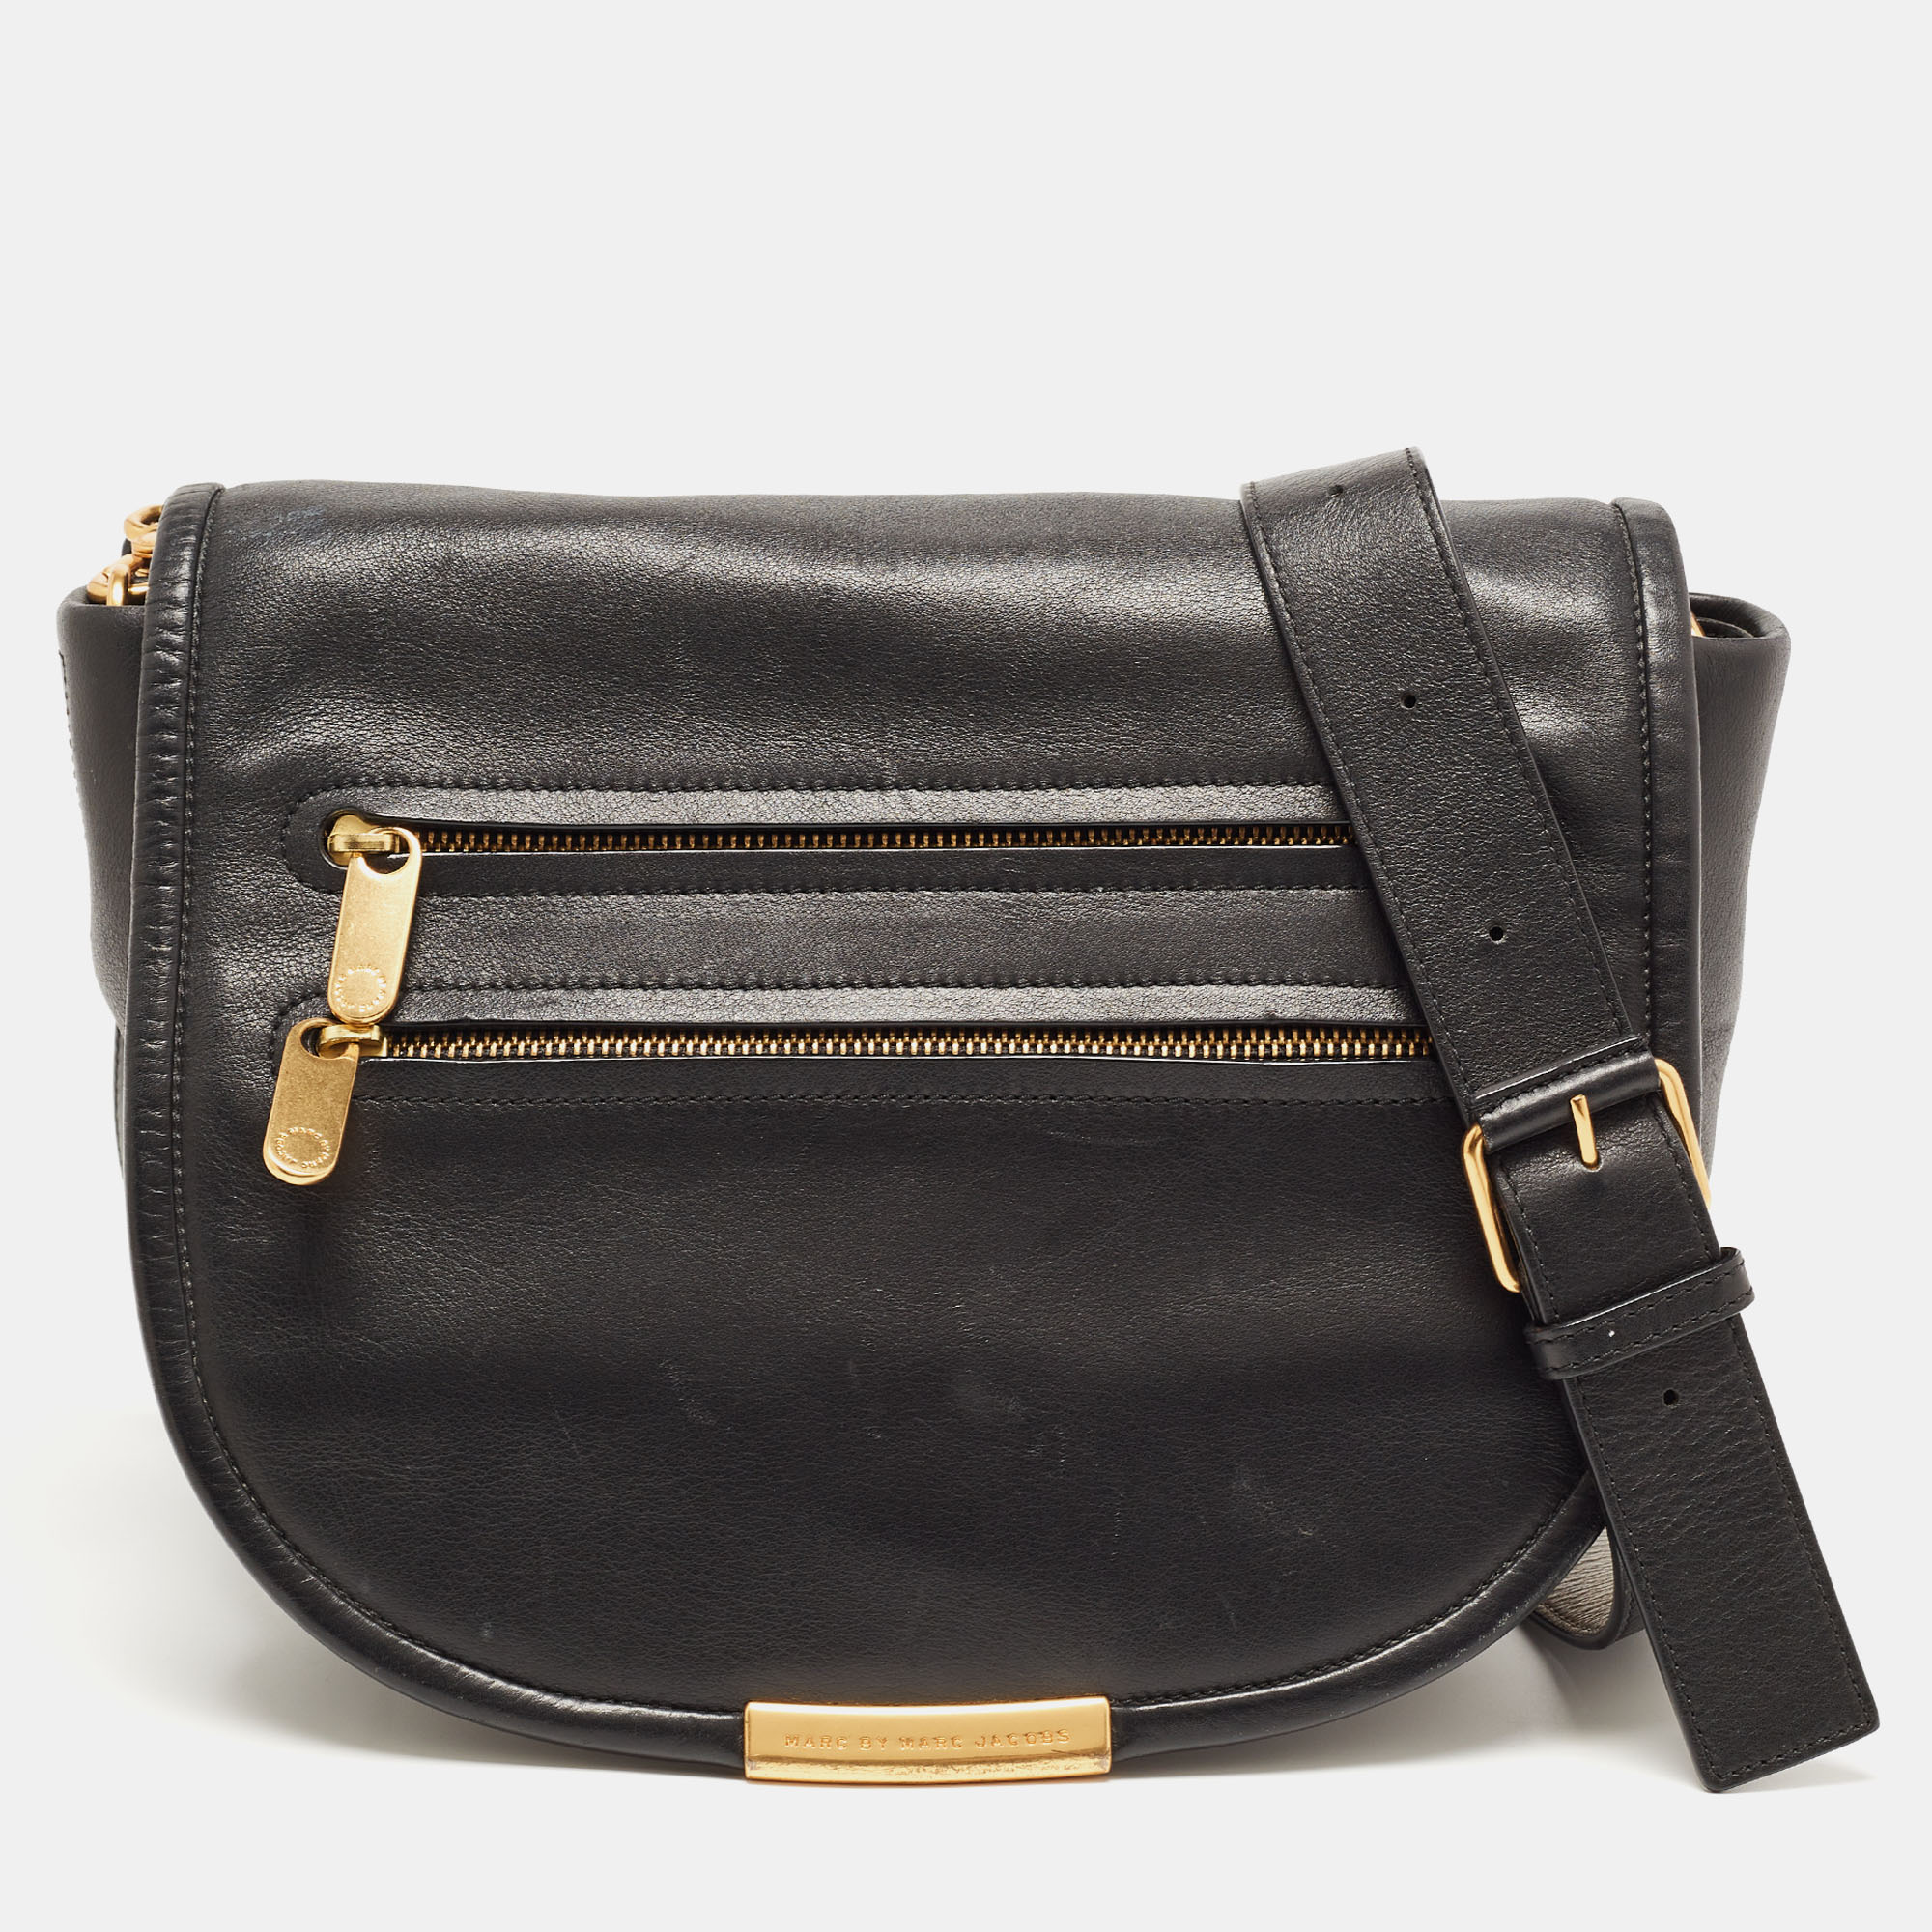 This sporty bag from Marc Jacobs is a smooth addition to your wardrobe. This bag is crafted from leather in black and complimented with gold tone hardware. This Luna messenger bag features two zipper pockets on the front and a comfortable strap. The roomy interior is great for keeping the essentials.